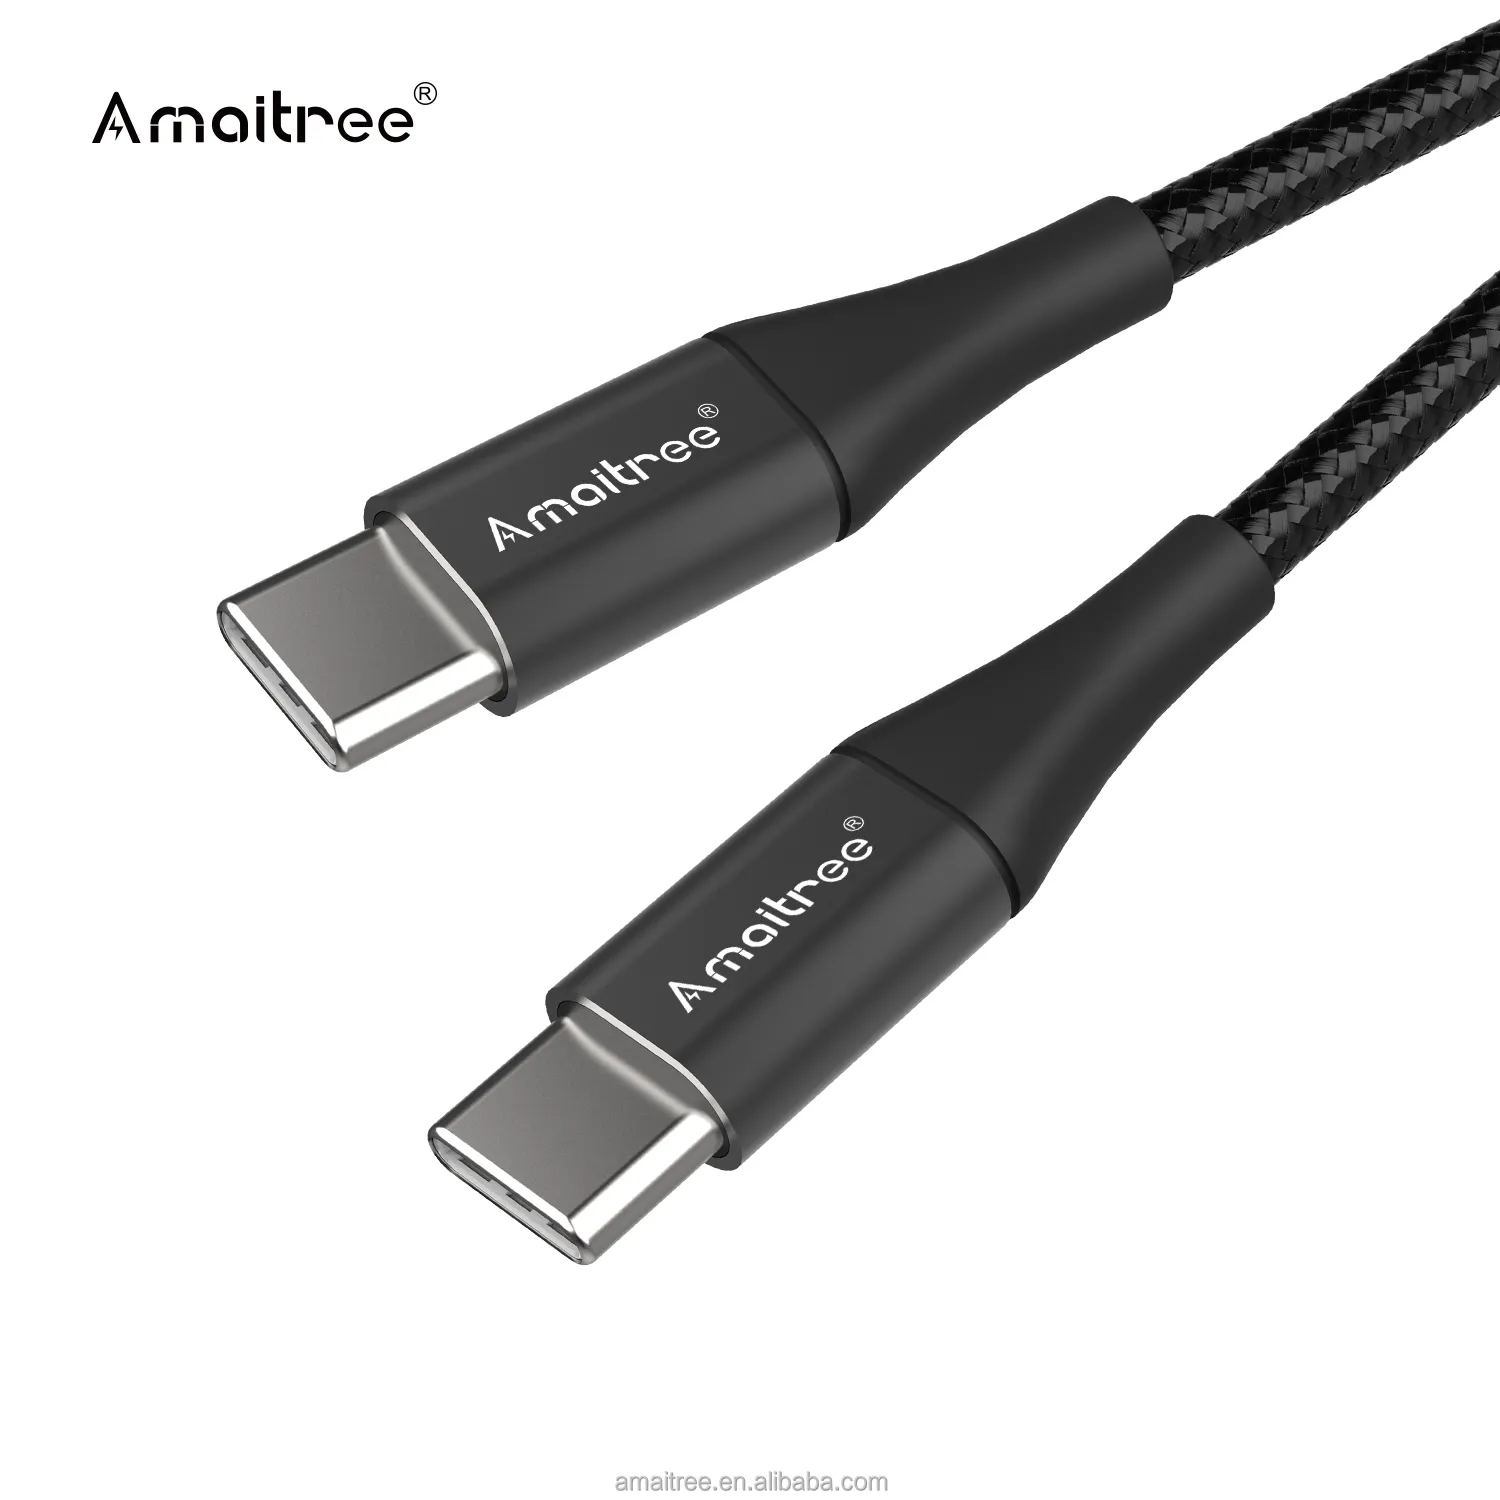 Amaitree A66 Supplier Direct Sales 1.2M Type C Fast Charging Data Cable USB Data Cable Charger For IPhone